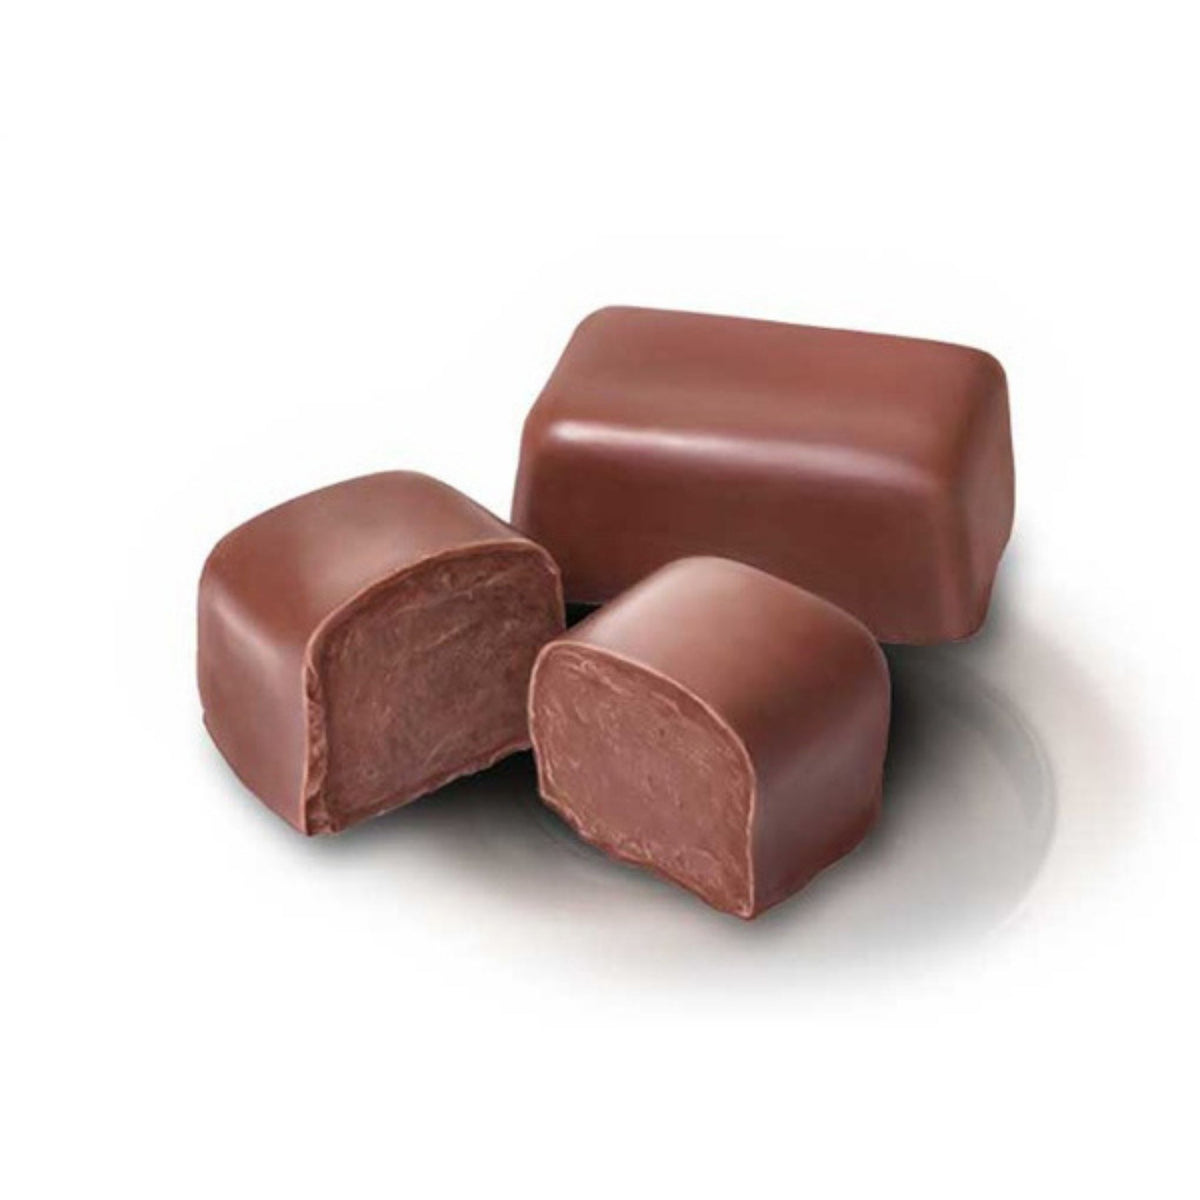 Milk Chocolate TruffleCremes, Made with a Milk Chocolate Ganache Center and Coated in an Outer Shell of Additional Milk Chocolate